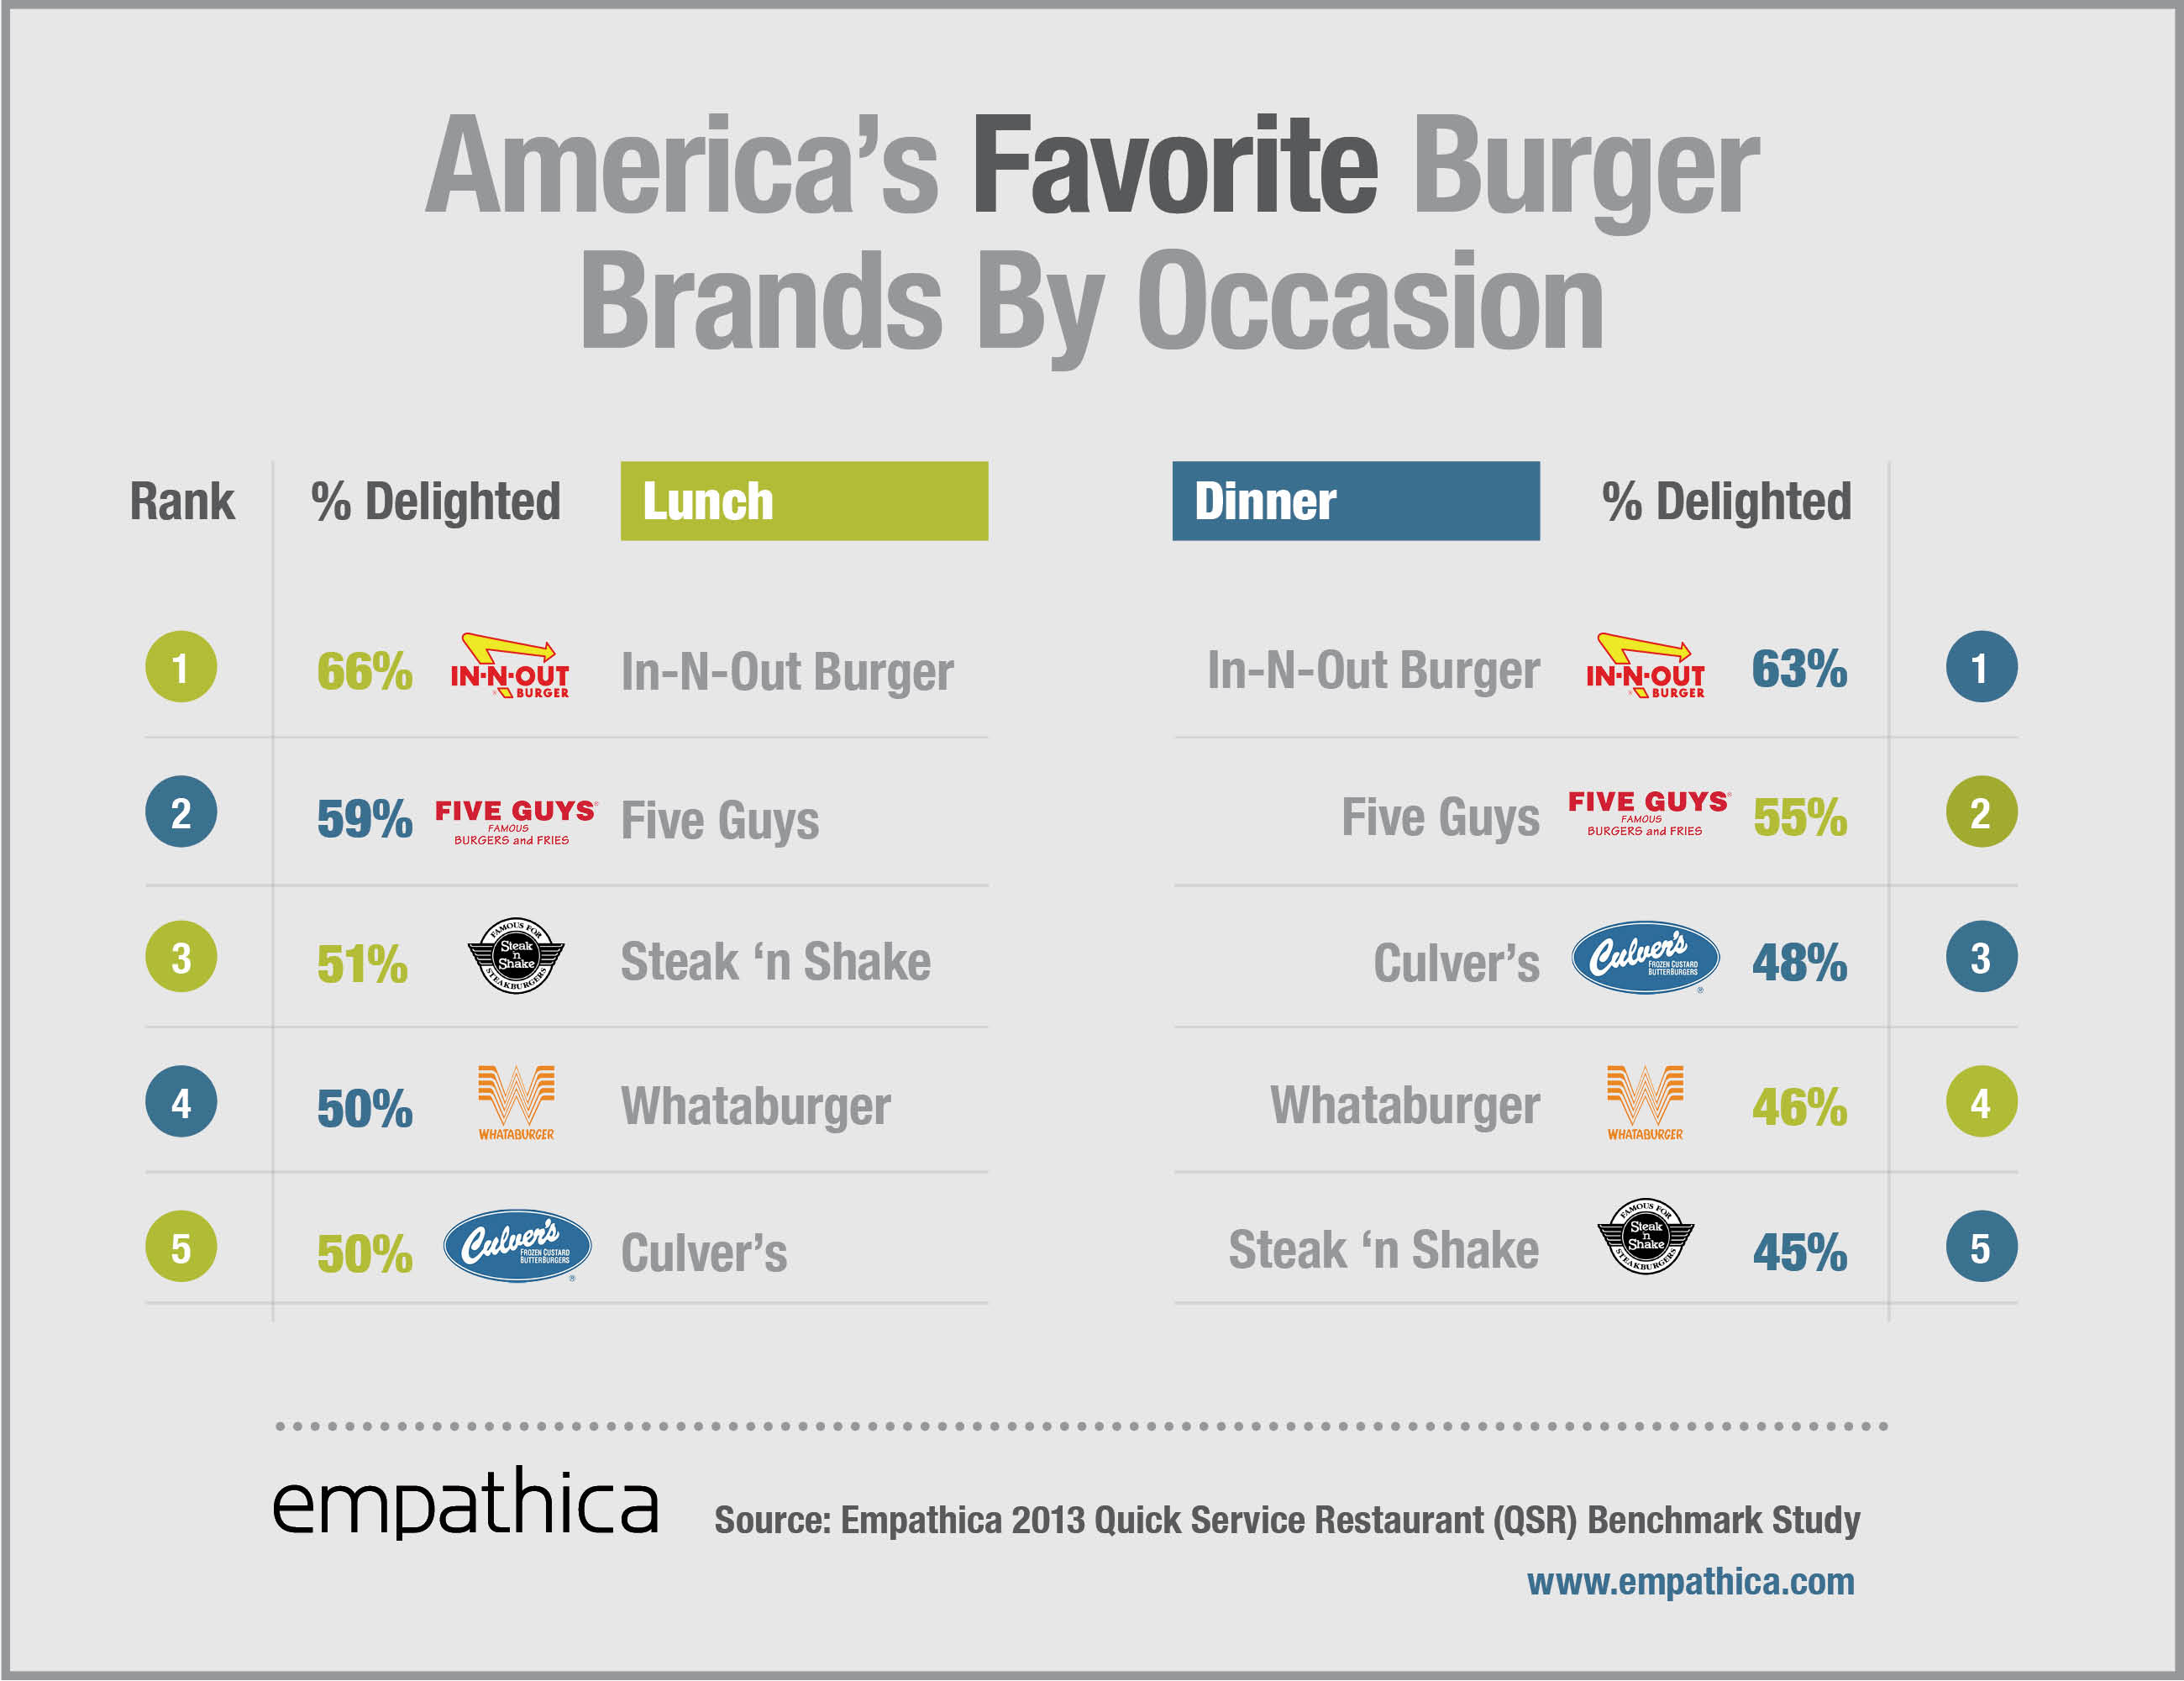 America's Favorite Burger Brands by Occasion